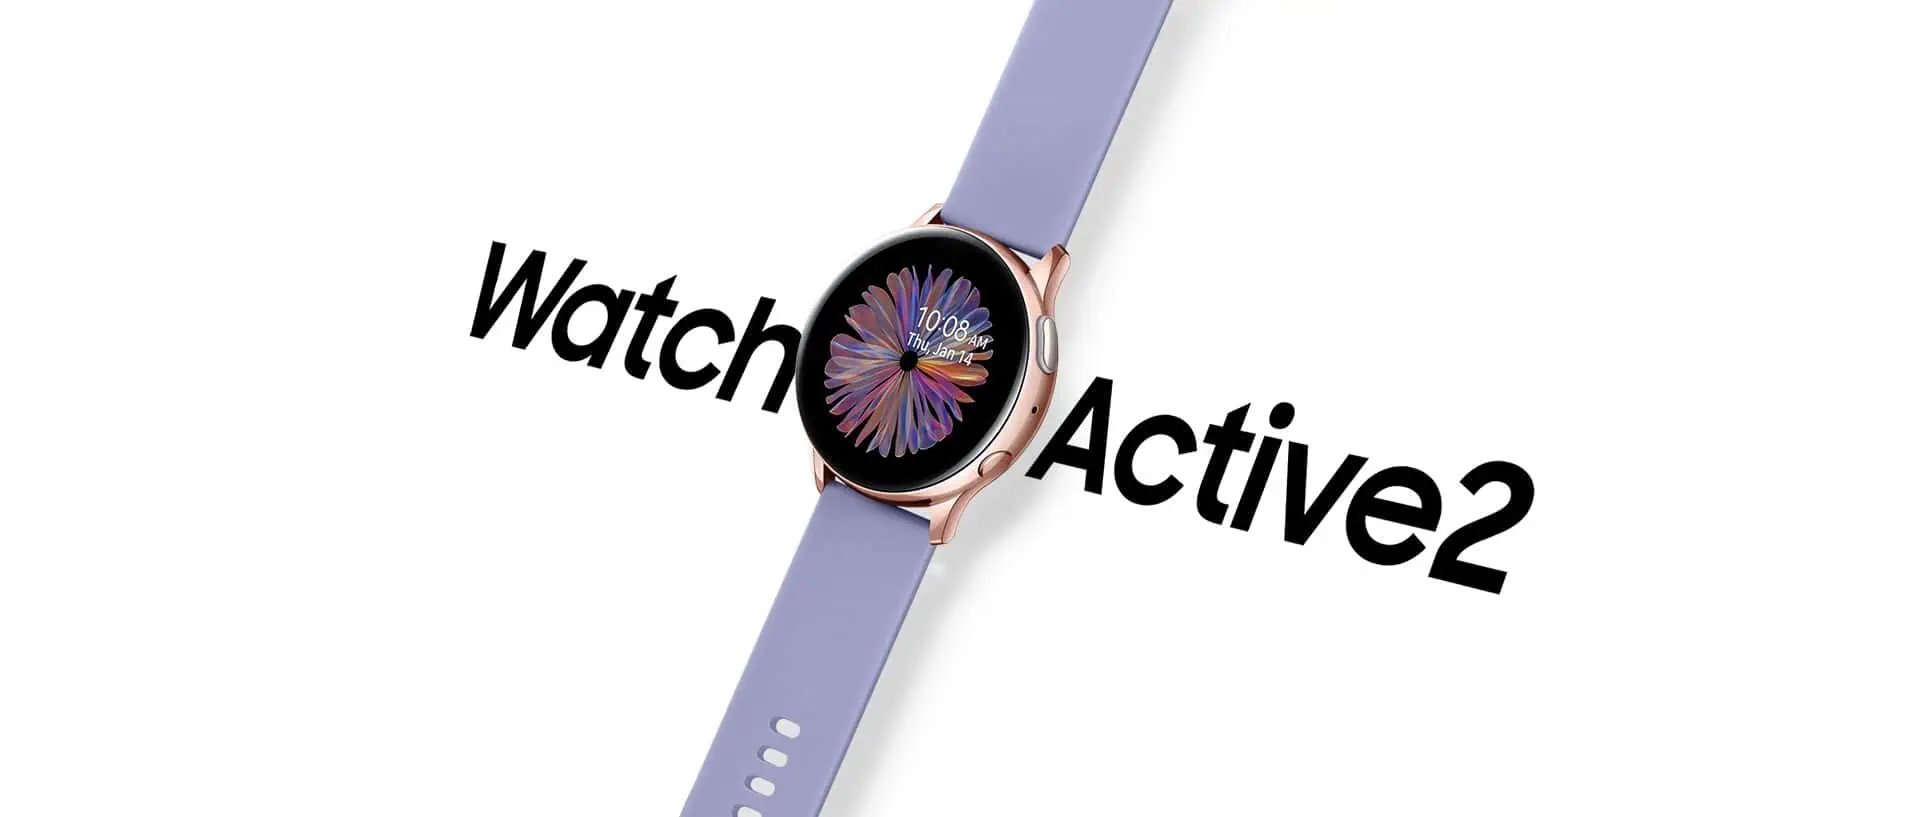 Samsung launch Samsung Galaxy Watch Active2  in Rose Gold